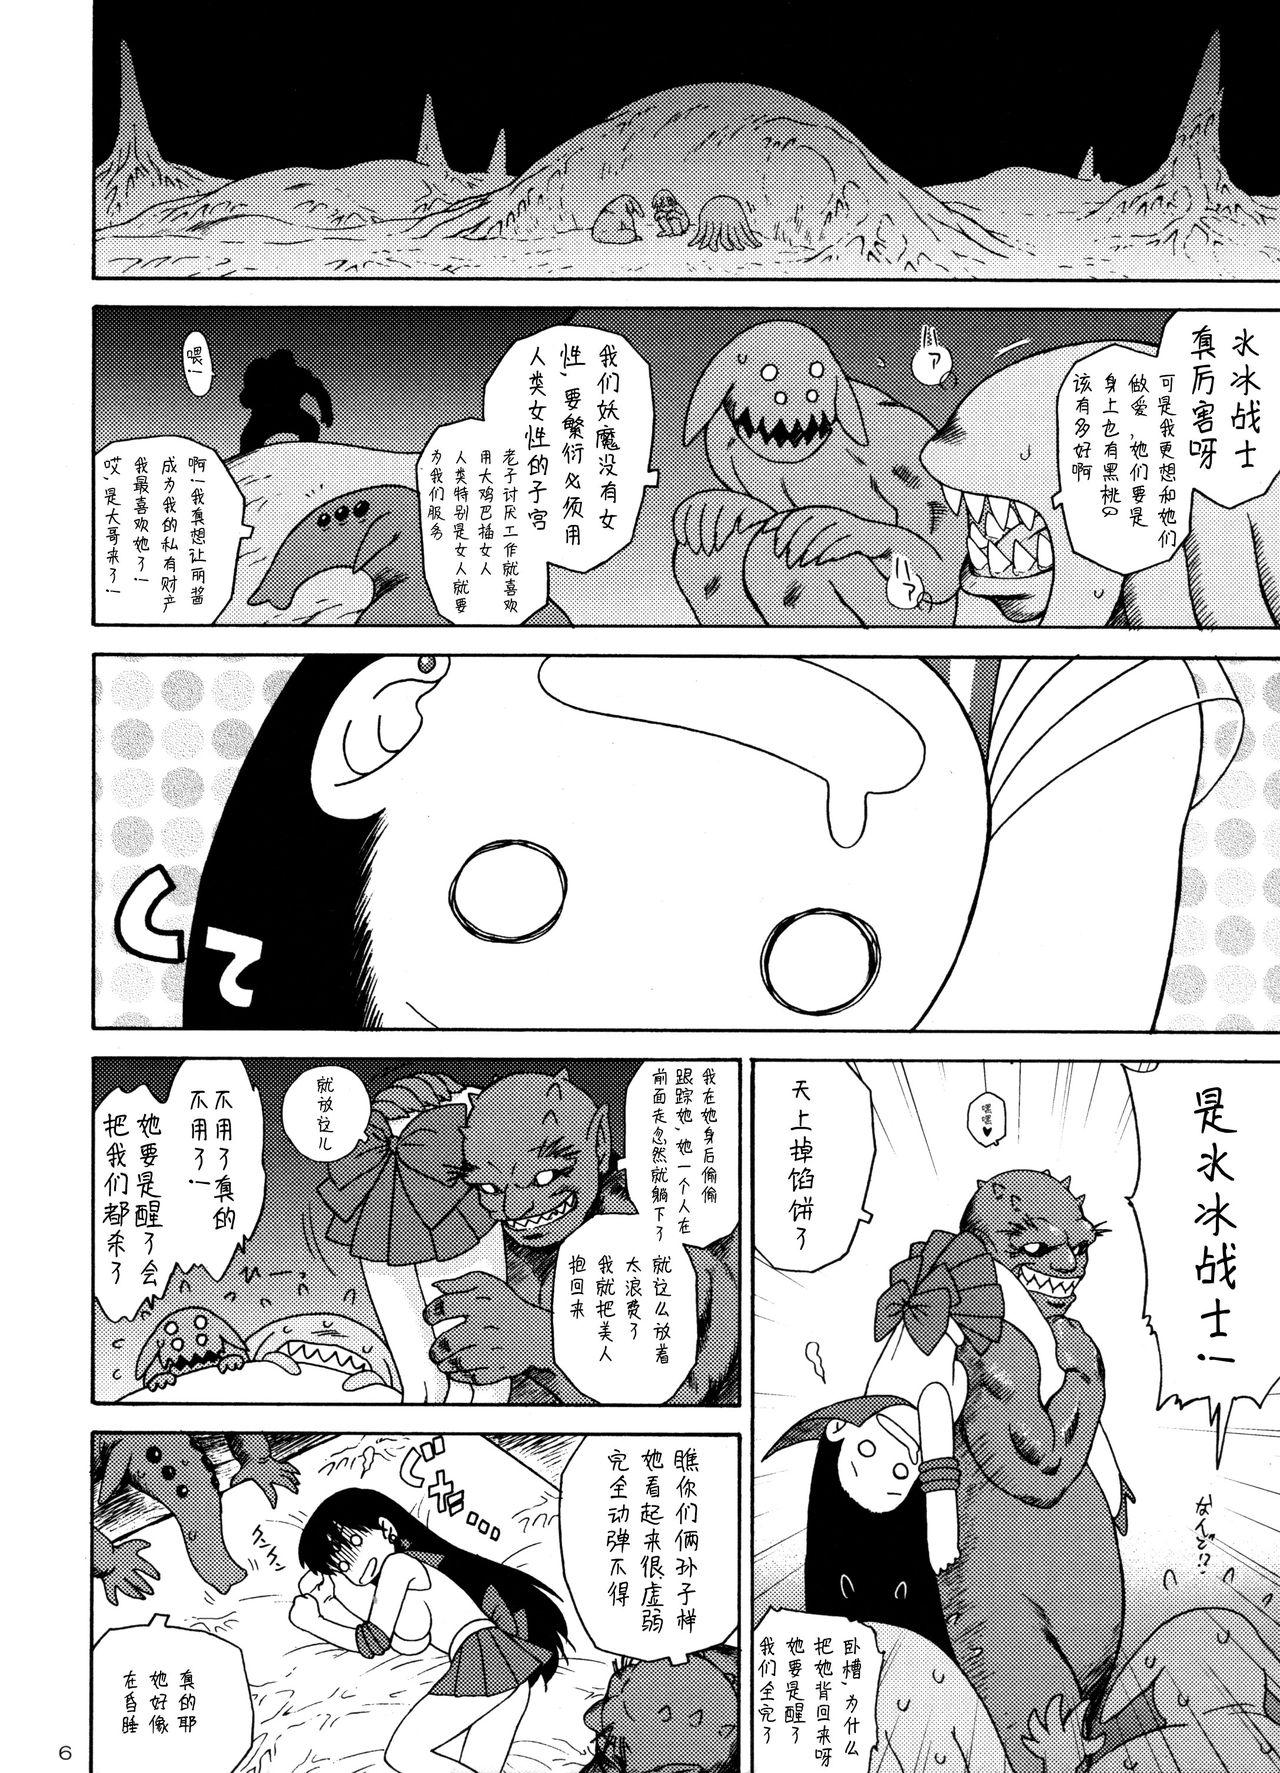 Licking QUEEN OF SPADES - 黑桃皇后 - Sailor moon Breasts - Page 9